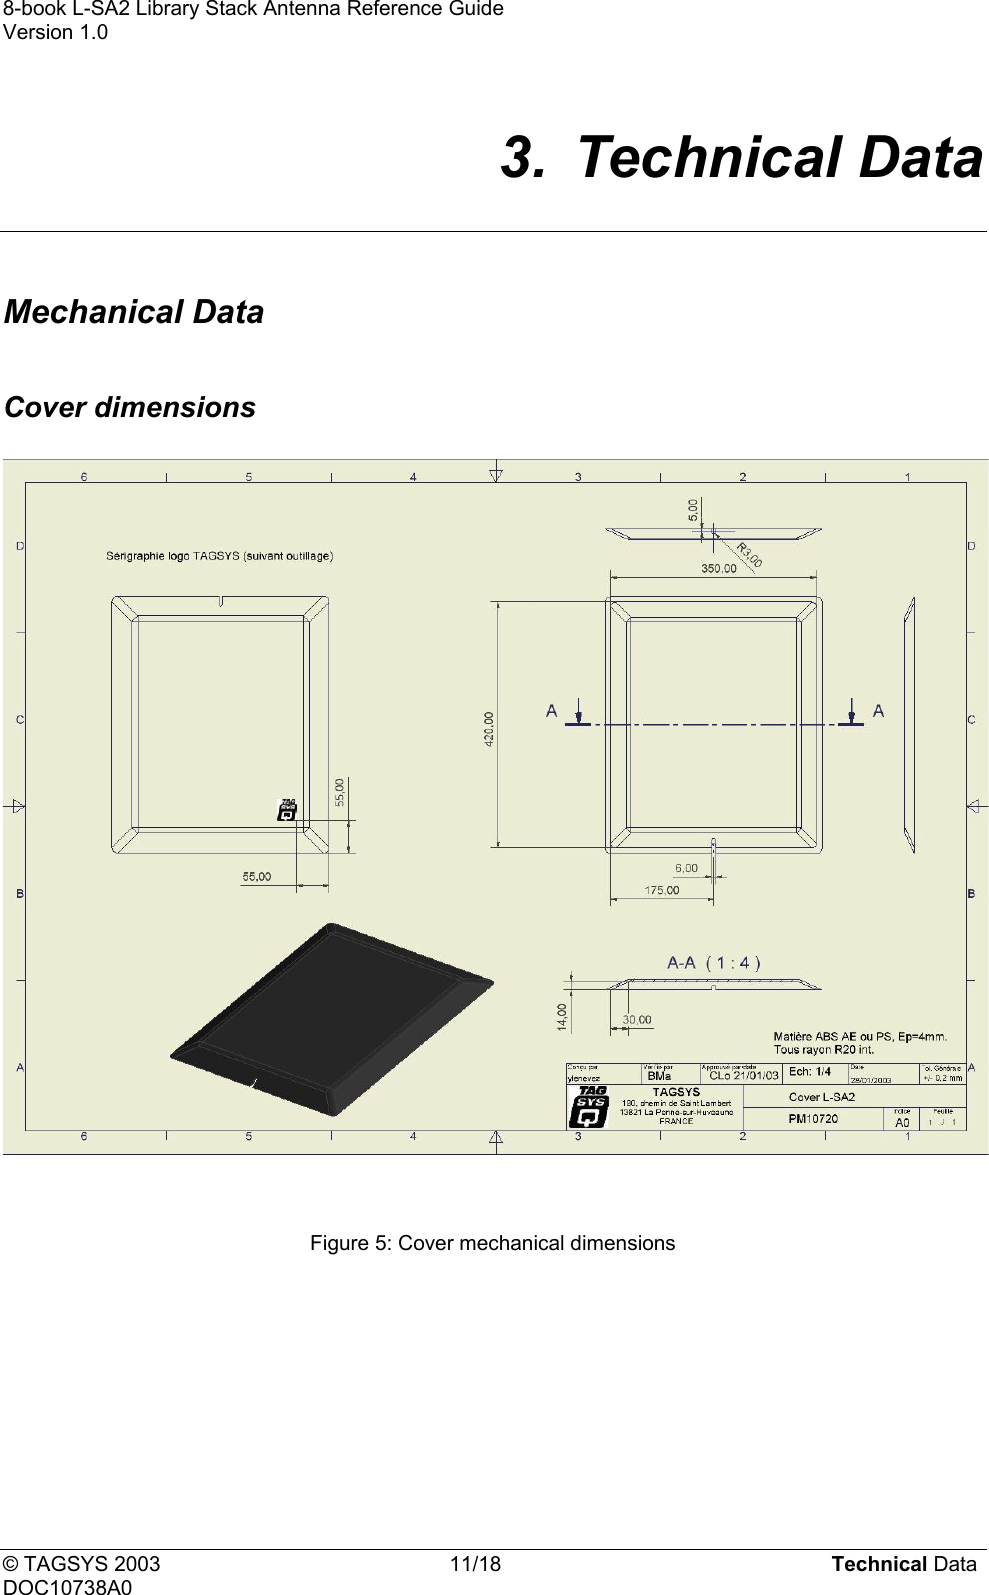 8-book L-SA2 Library Stack Antenna Reference Guide    Version 1.0  3. Technical Data  Mechanical Data  Cover dimensions      Figure 5: Cover mechanical dimensions  © TAGSYS 2003  11/18  Technical Data DOC10738A0 